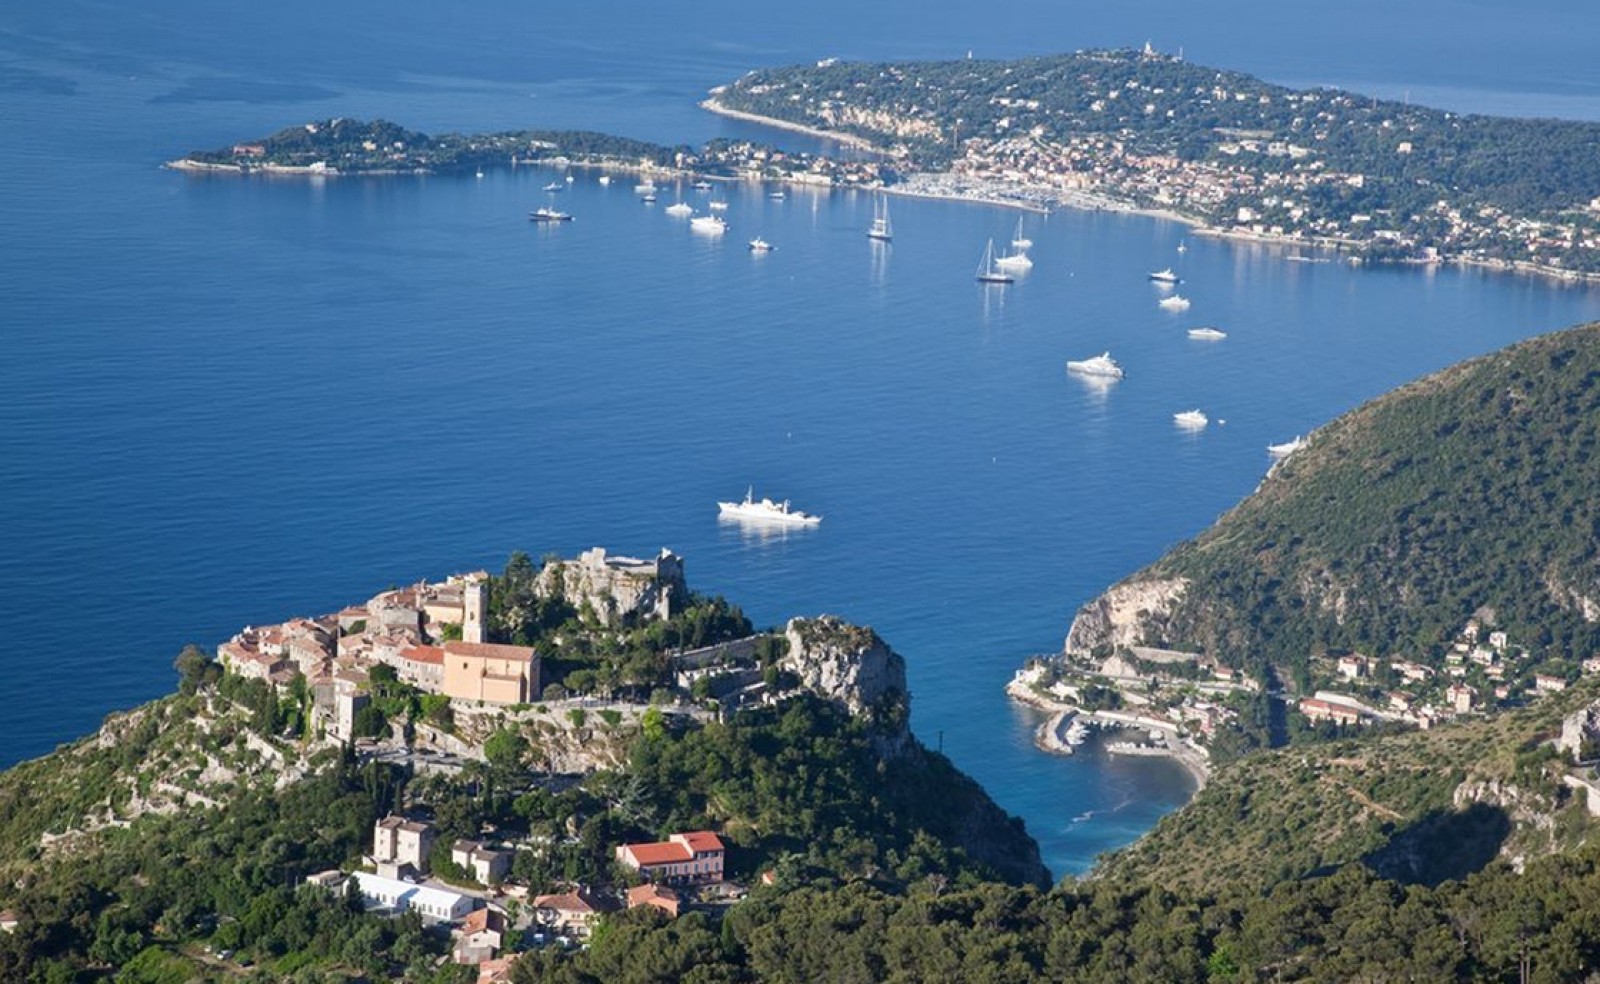 Transfer from Nice Airport to Saint-Jean-Cap-Ferrat - Book your transfer 24/7 - Ruby Services - Book Your Transfer From Nice Airport to Saint-Jean-Cap-Ferrat With Private Chauffeur. 